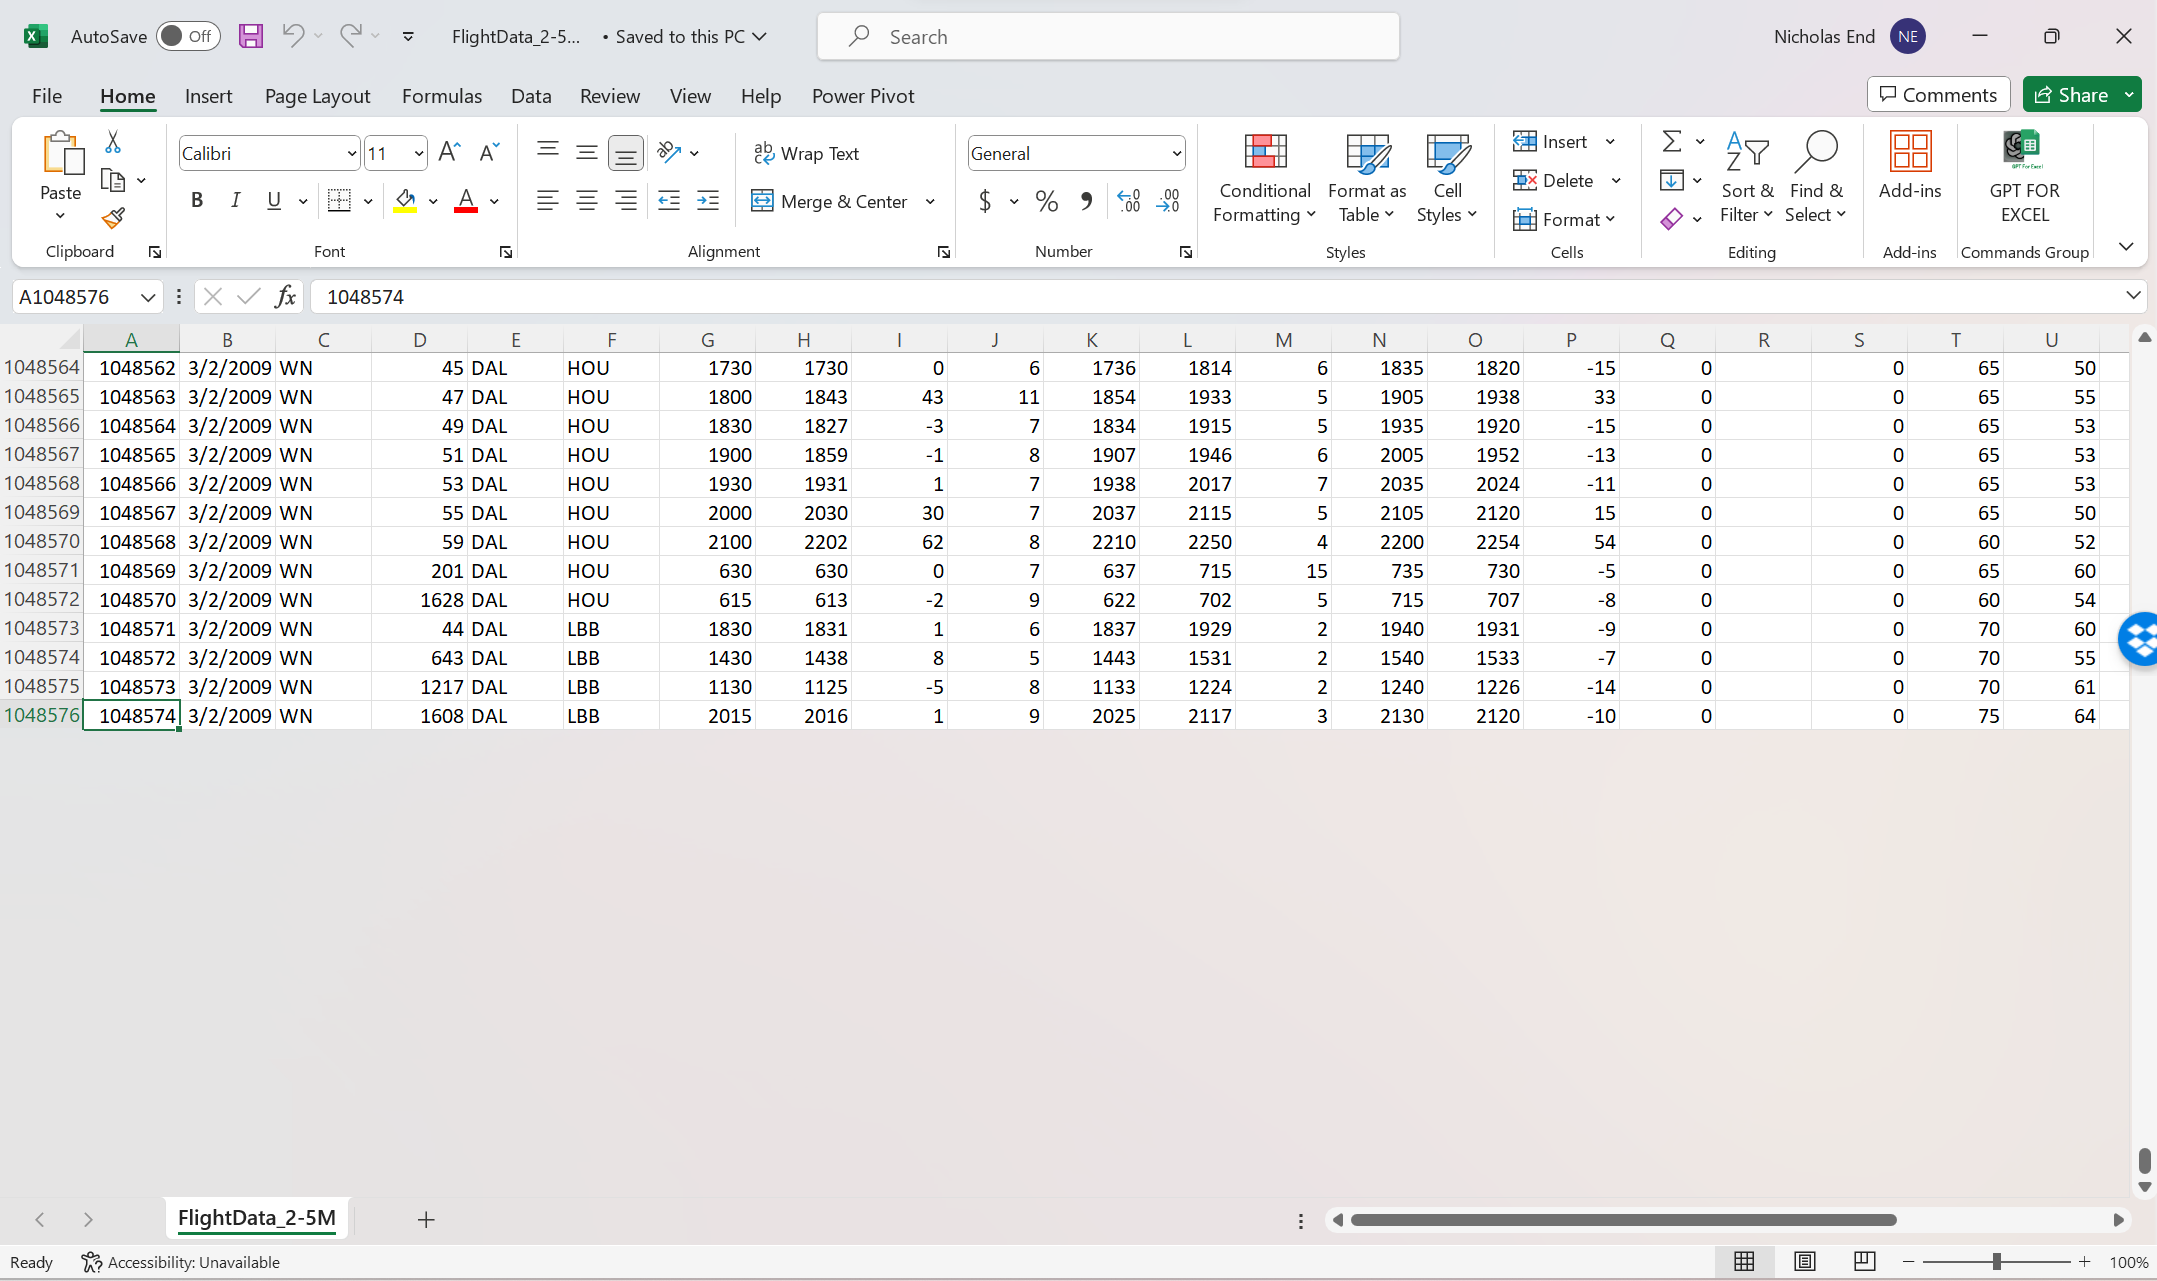 Excel failed to load all data